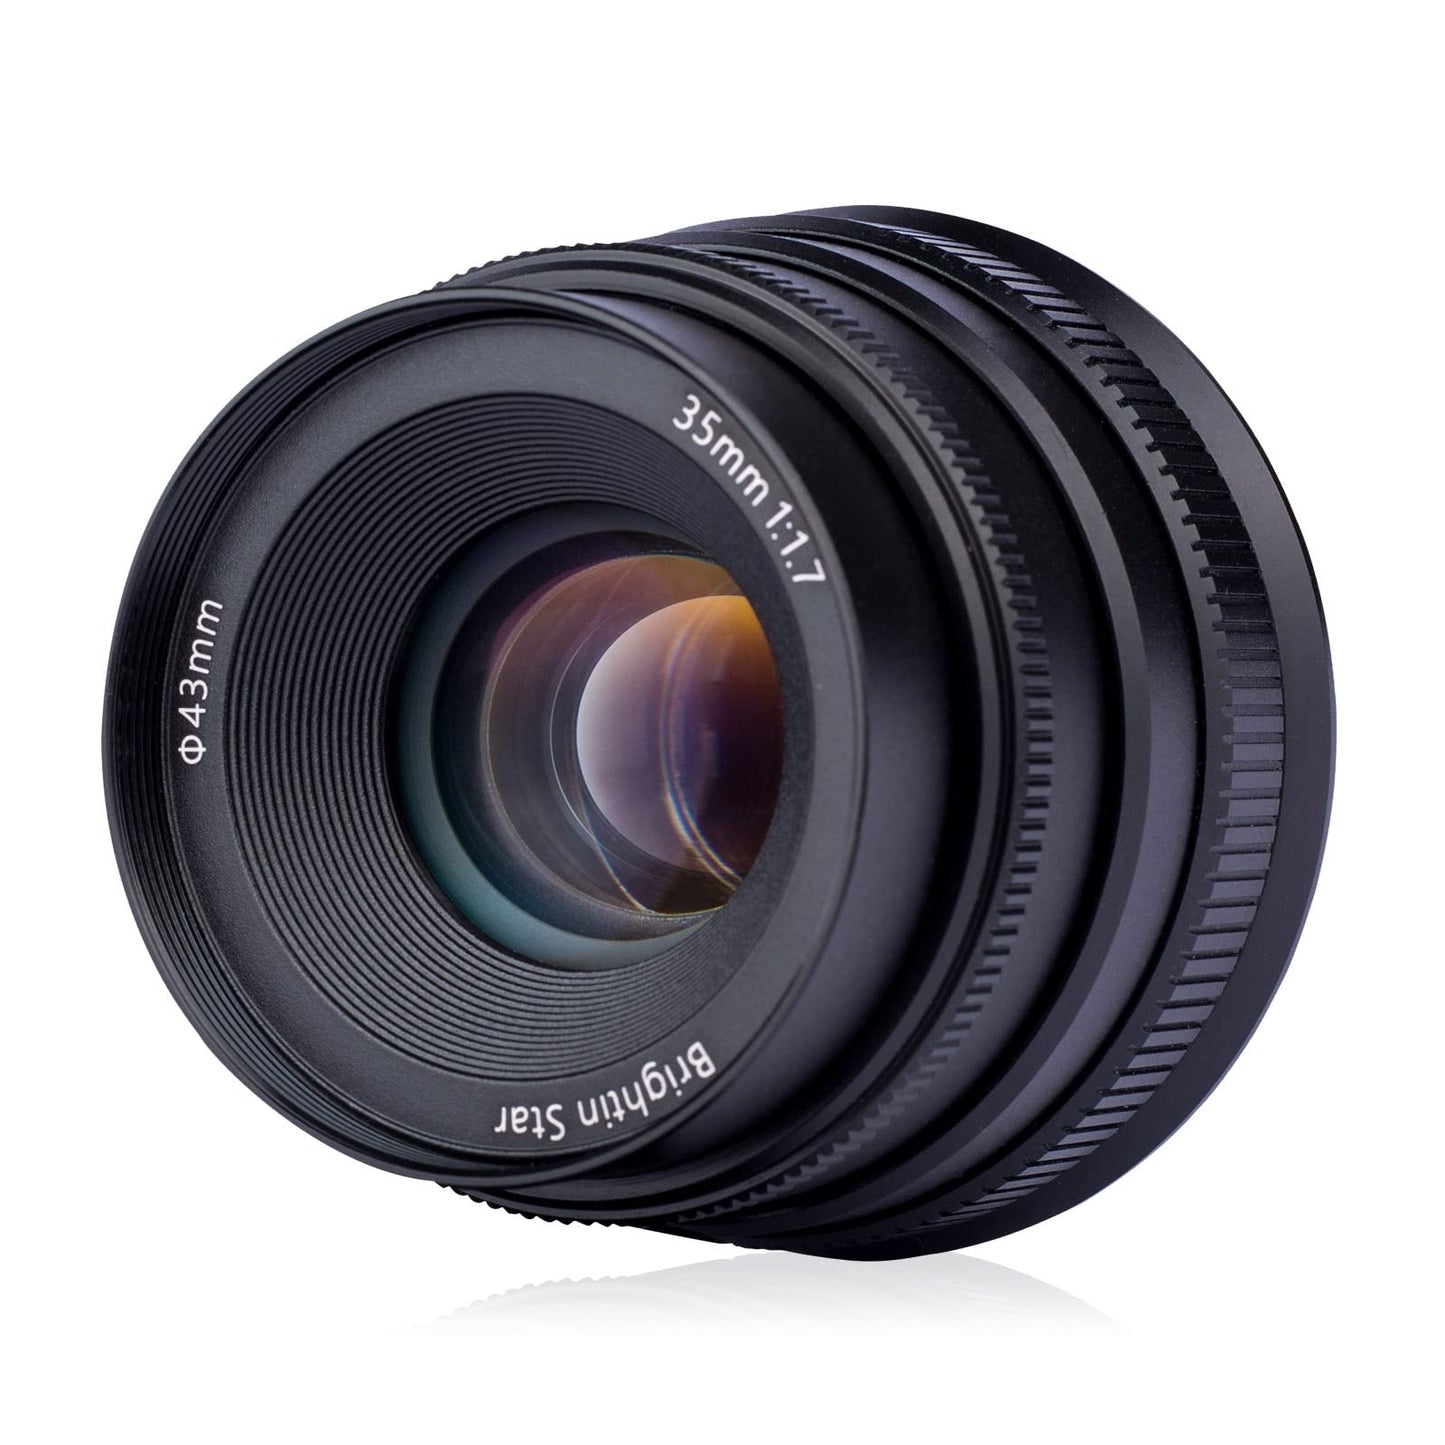 35mm F1.7 Wide-Angle Manual Focus Prime Lens for Fuji X Mount